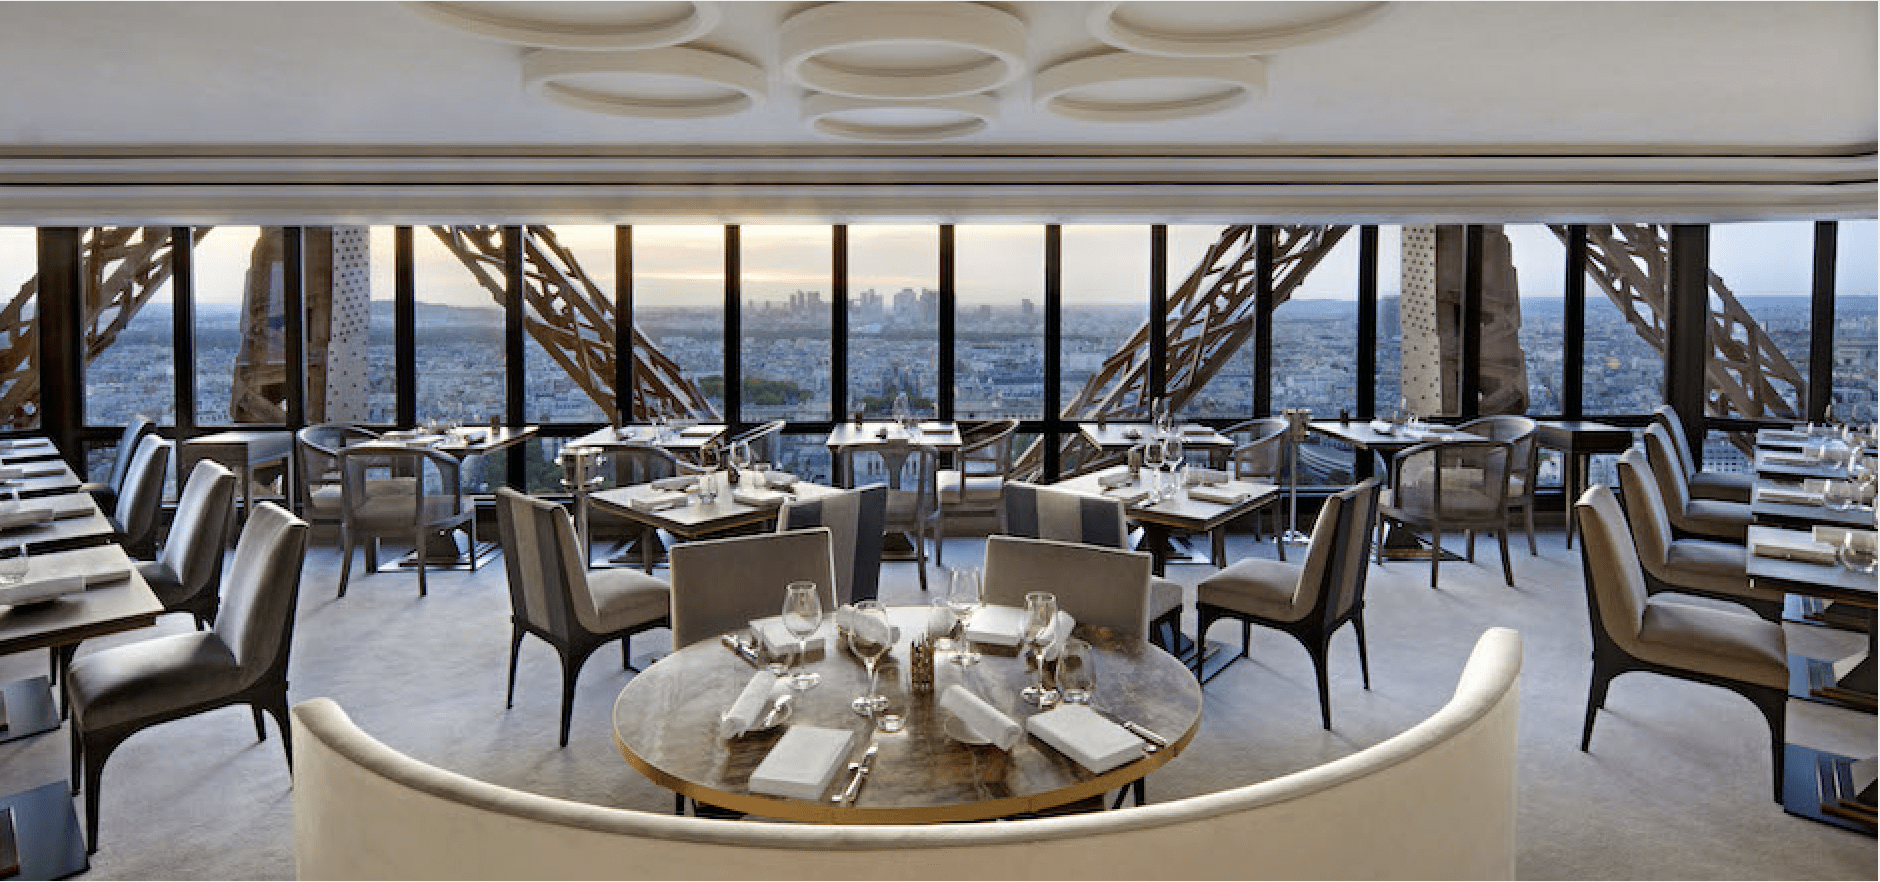 Restaurants with View of Eiffel Tower